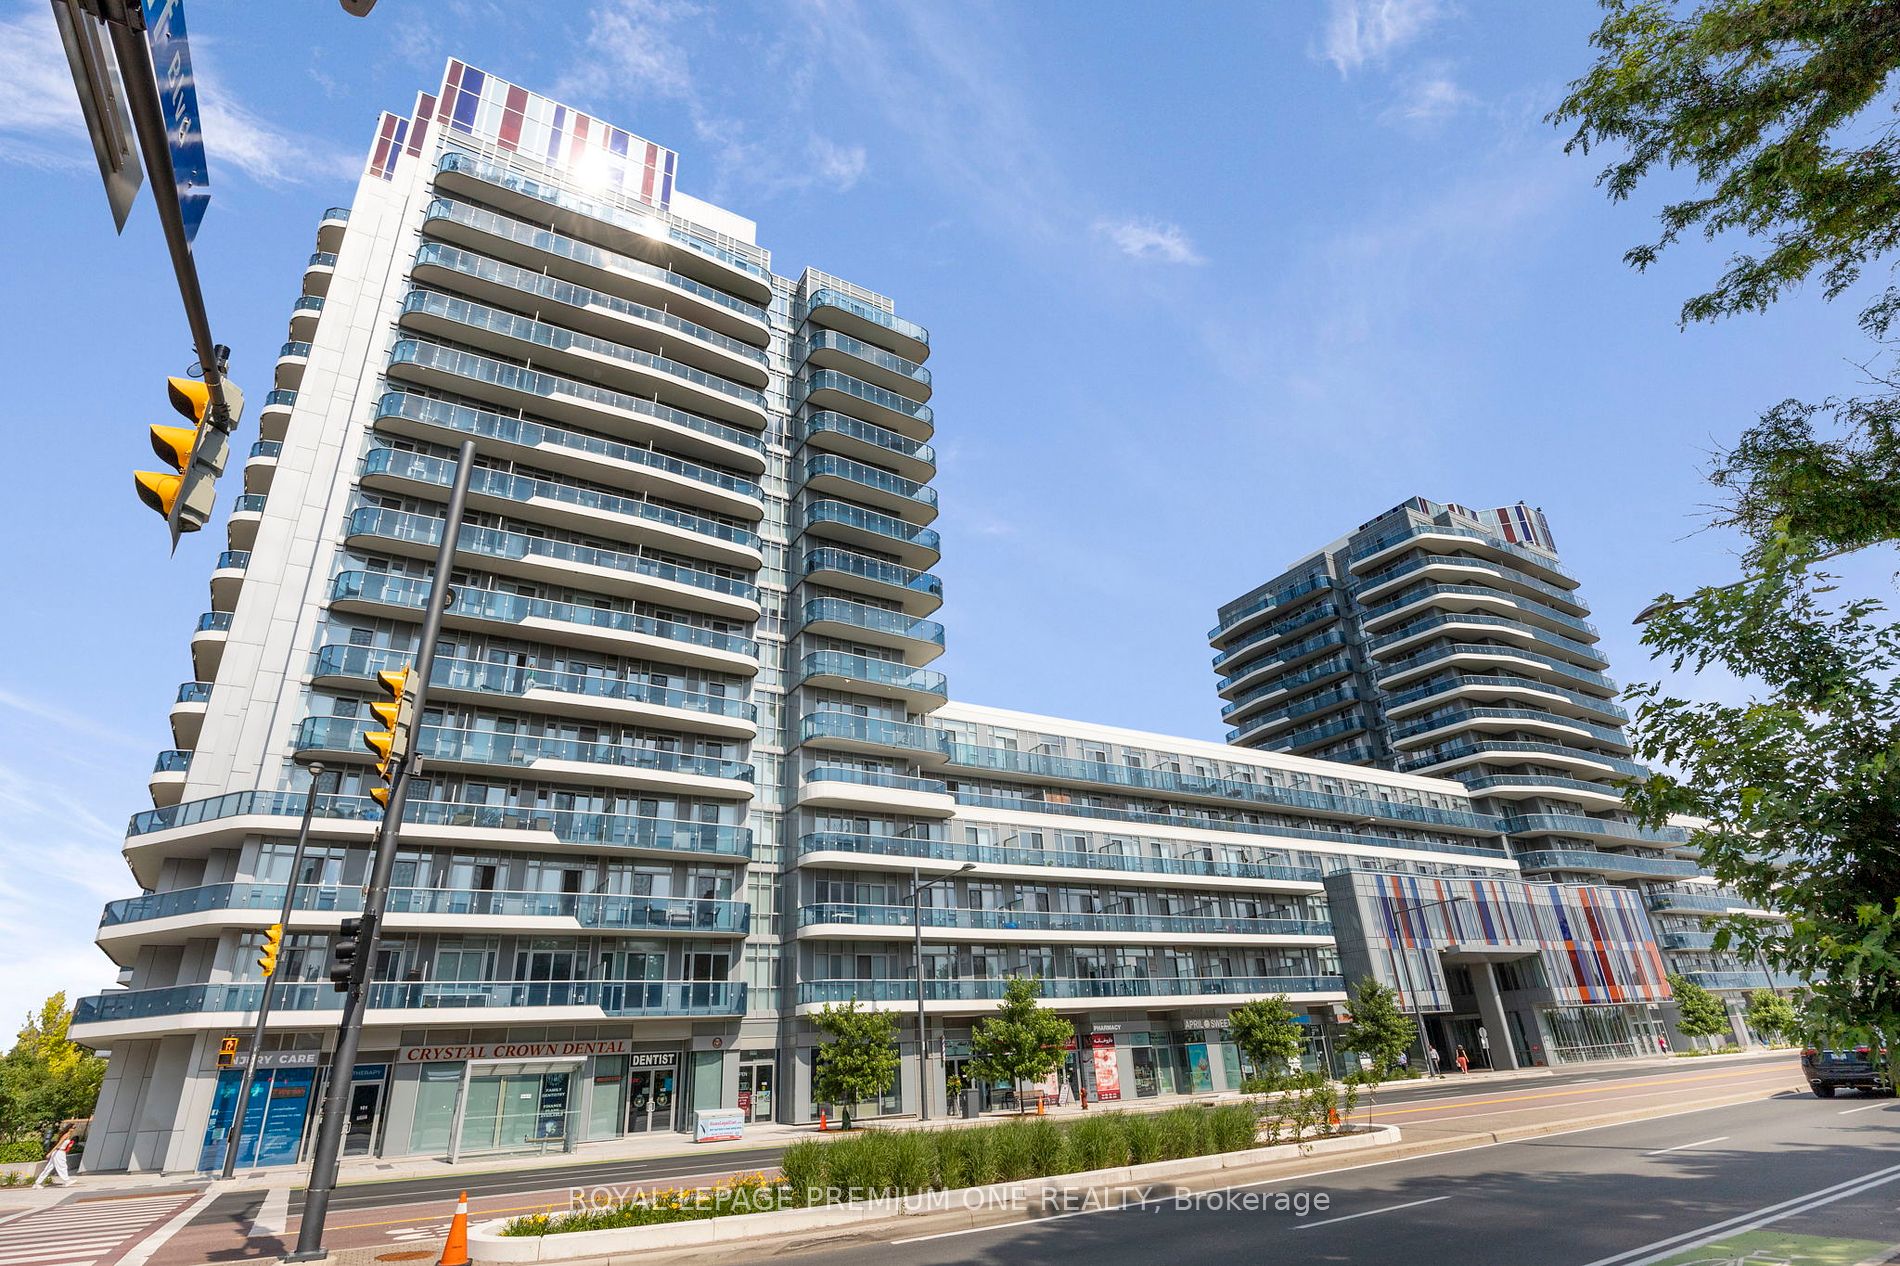 Condo Apt house for sale at 9471 Yonge St Richmond Hill Ontario